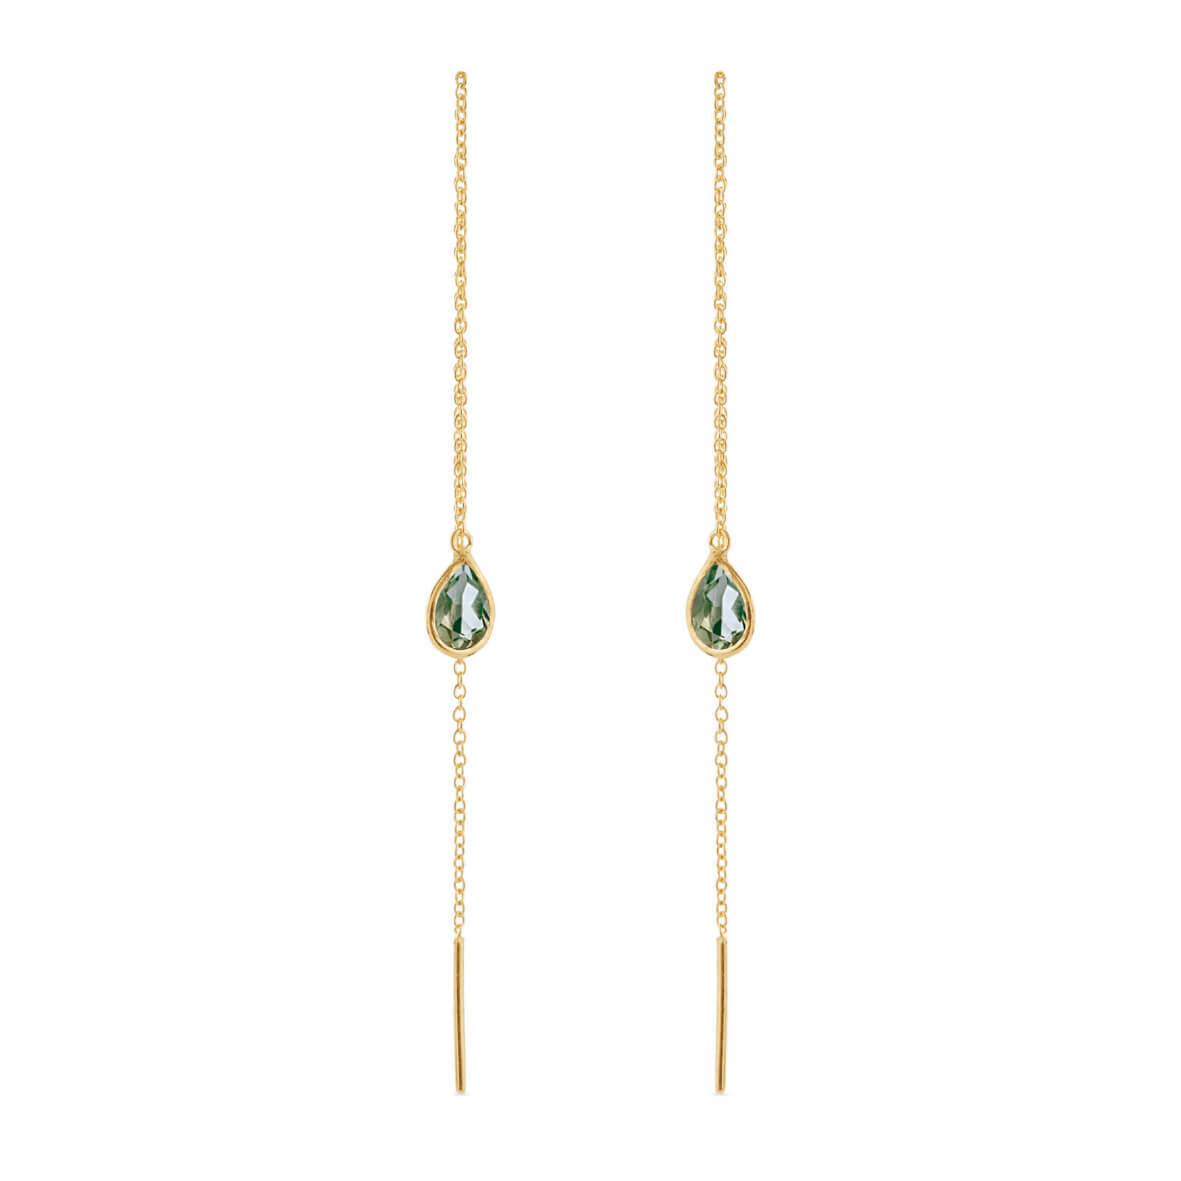 Ear chains in gold plated silver with green quartz - Susanne Friis ...